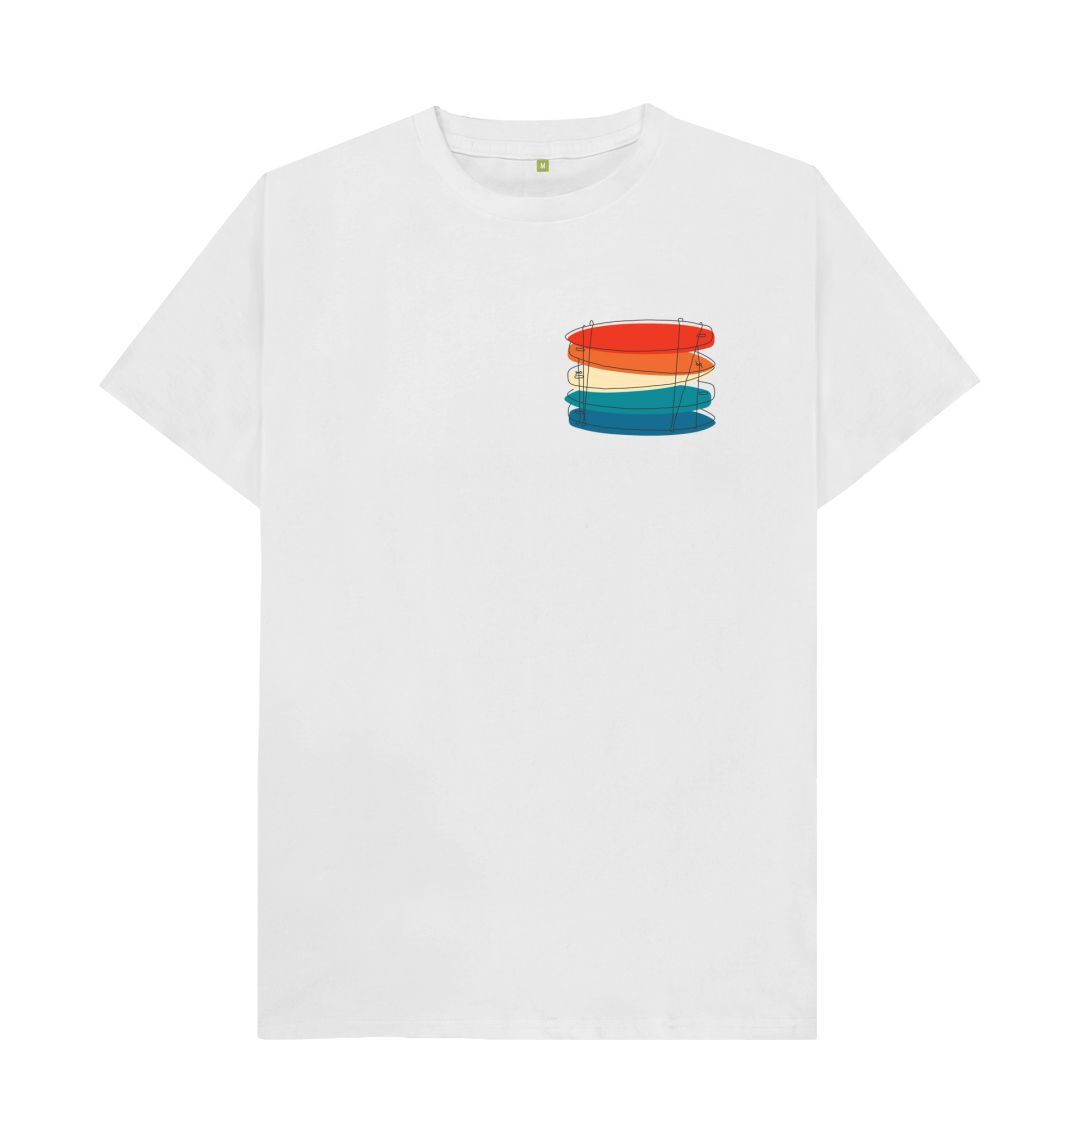 White 'SIMPLY SURFBOARDS' Mens Tee